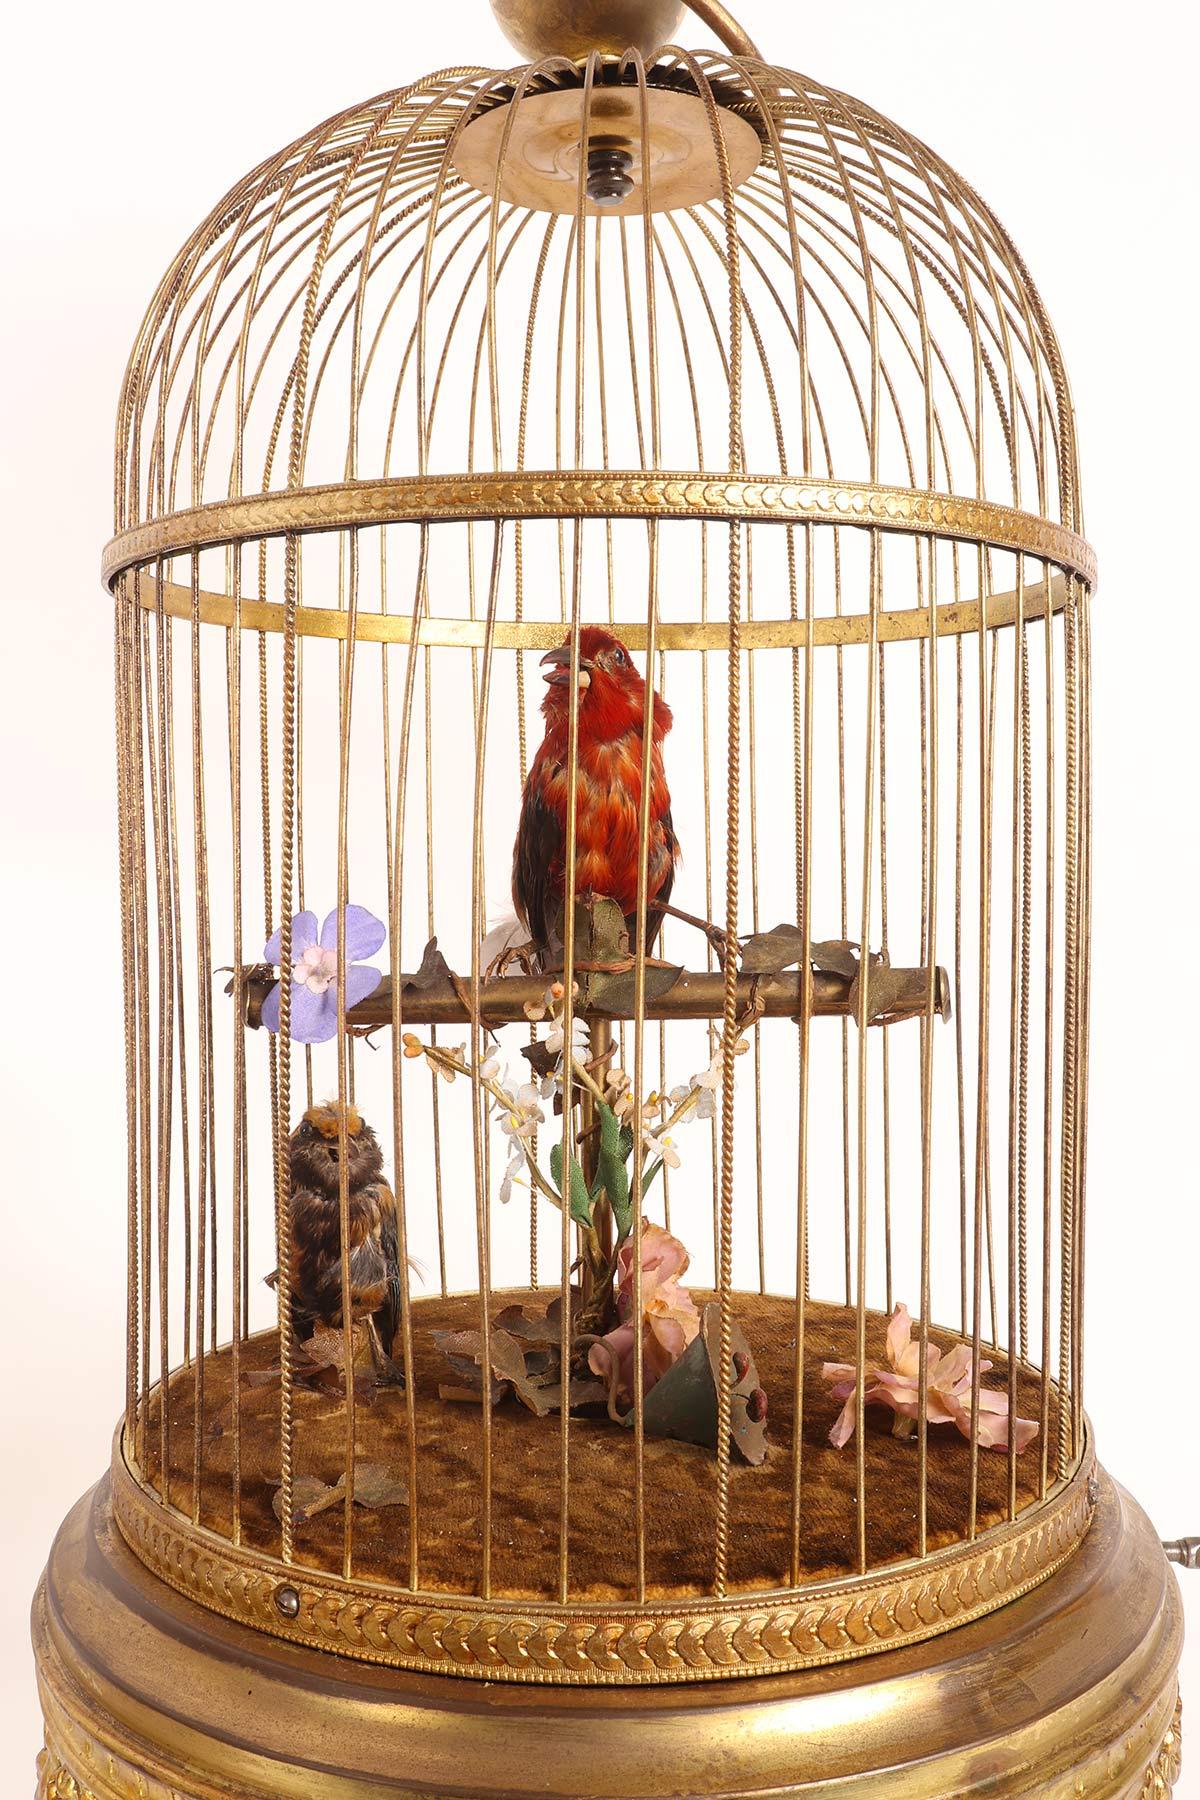 A French automaton: a cage with birds in gilded brass. Automata were built by master watchmakers to amaze. The joy offered by the vision of these automata that move, sing, look at each other, communicate with each other, stimulates the observer's